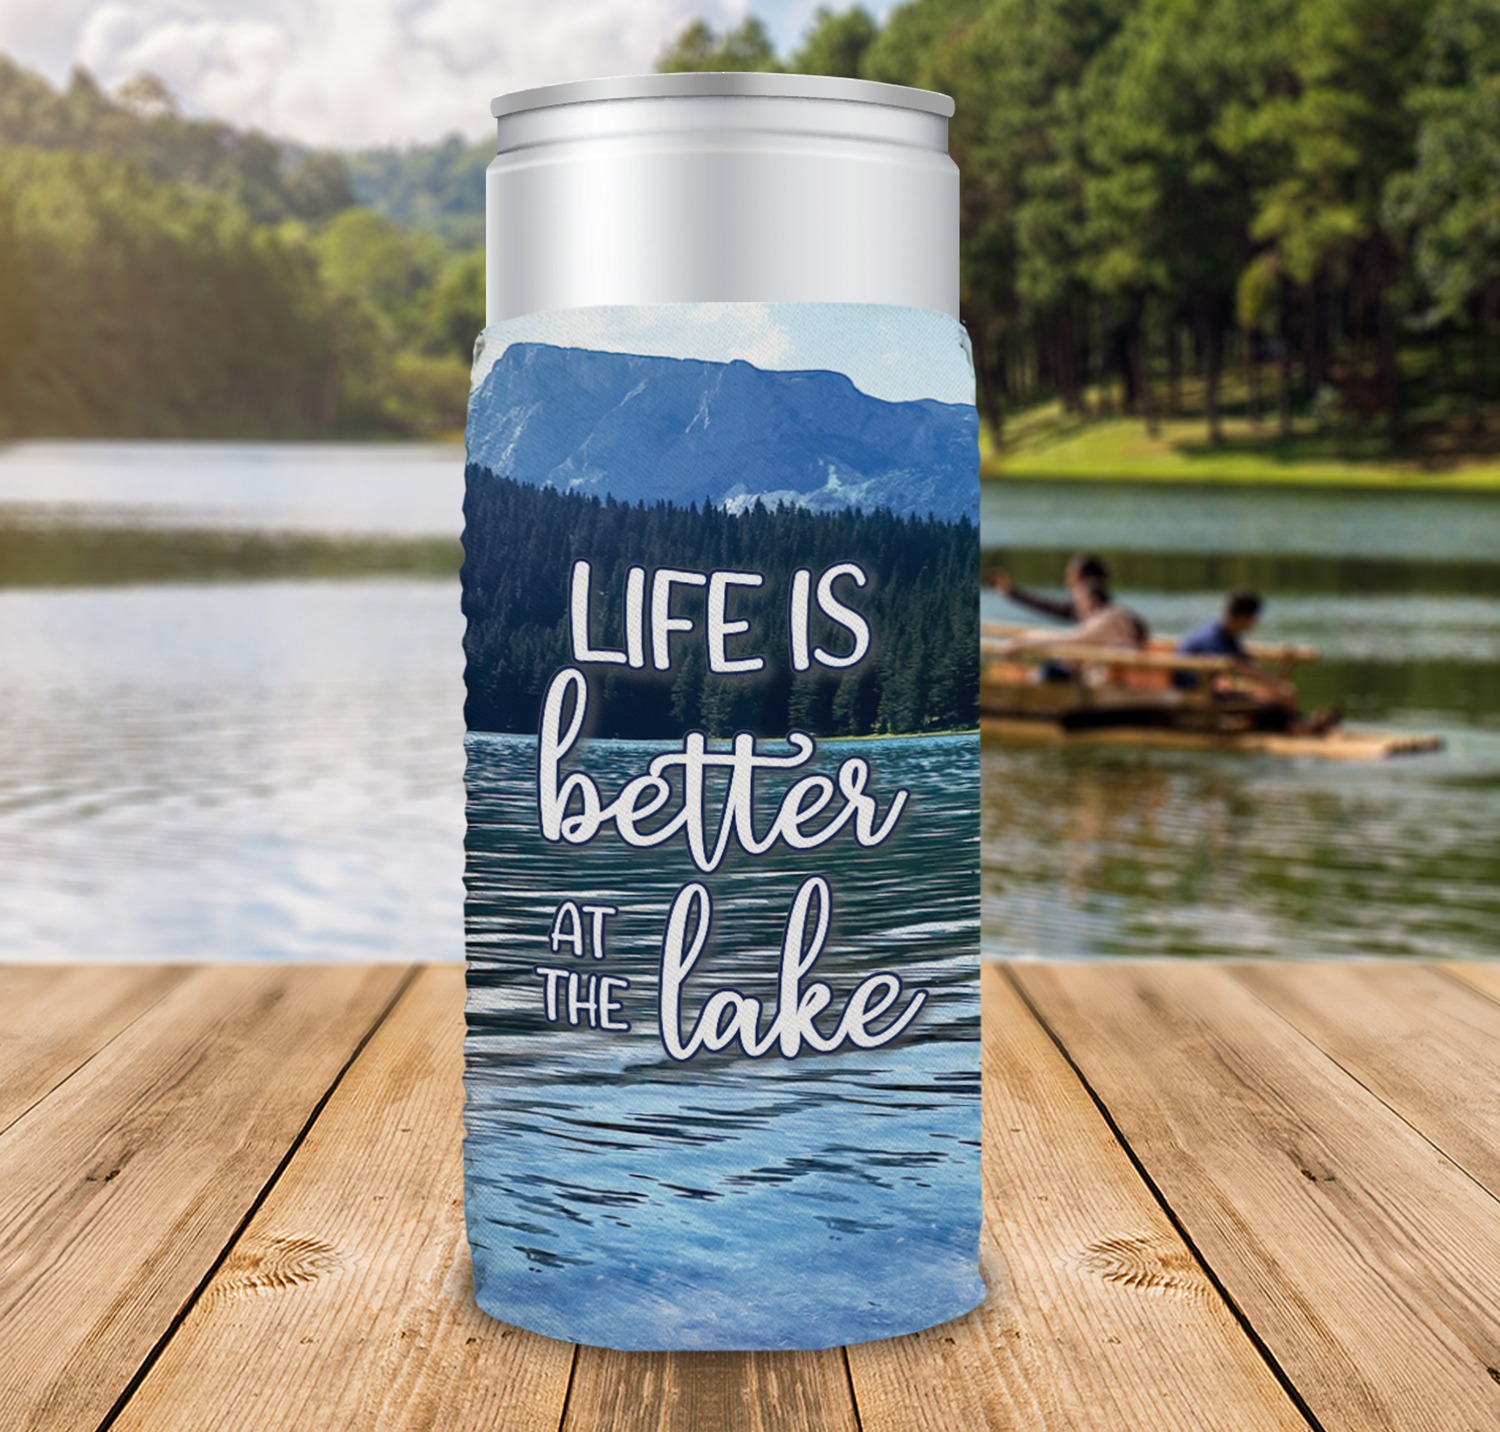 Can insulator customized with Life is better at the lake